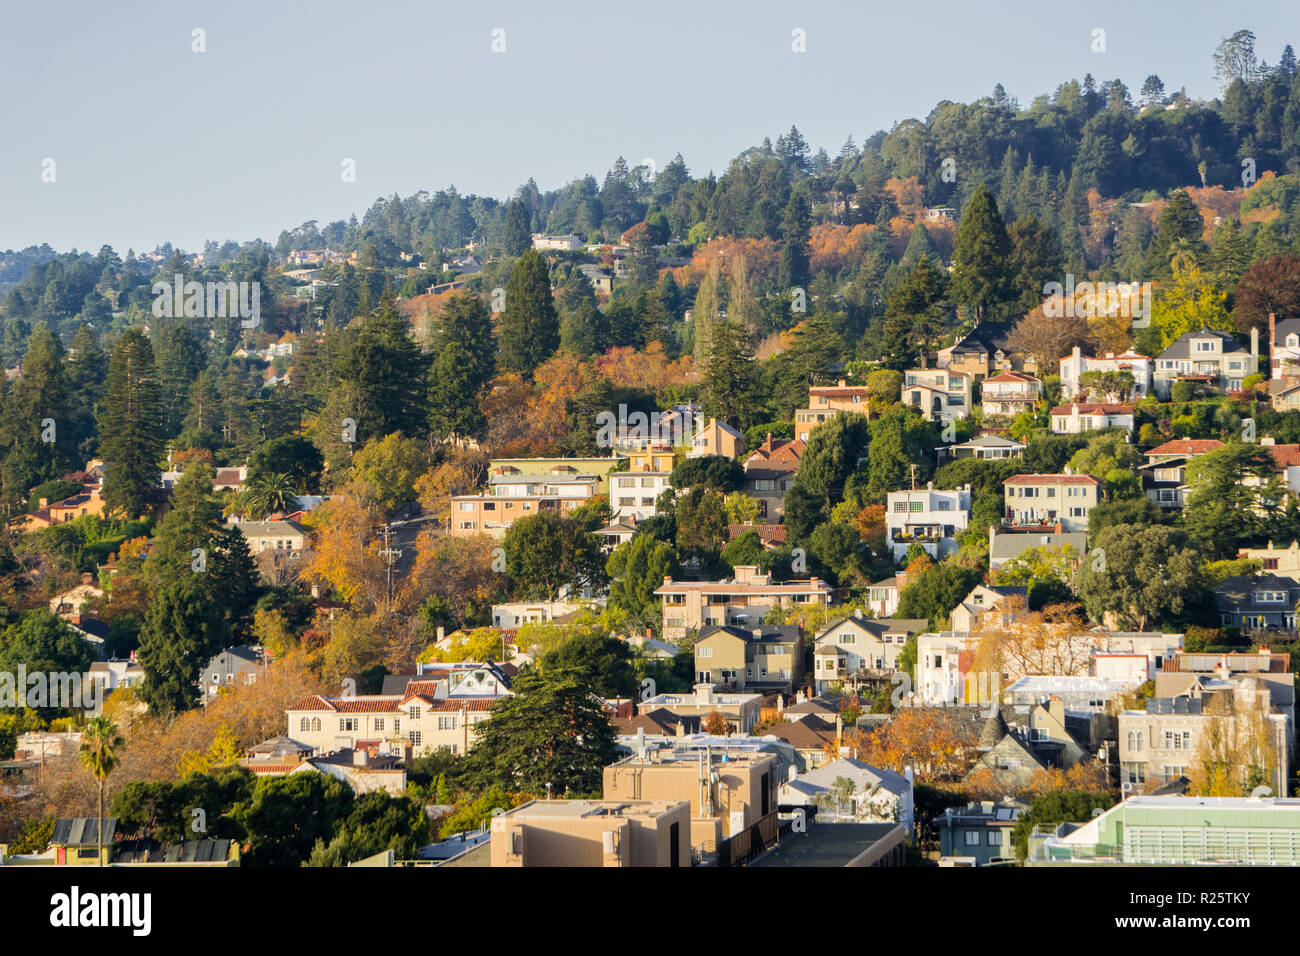 Aerial view of residential neighborhood built on a hill on a sunny autumn day, Berkeley, San Francisco bay, California; Stock Photo